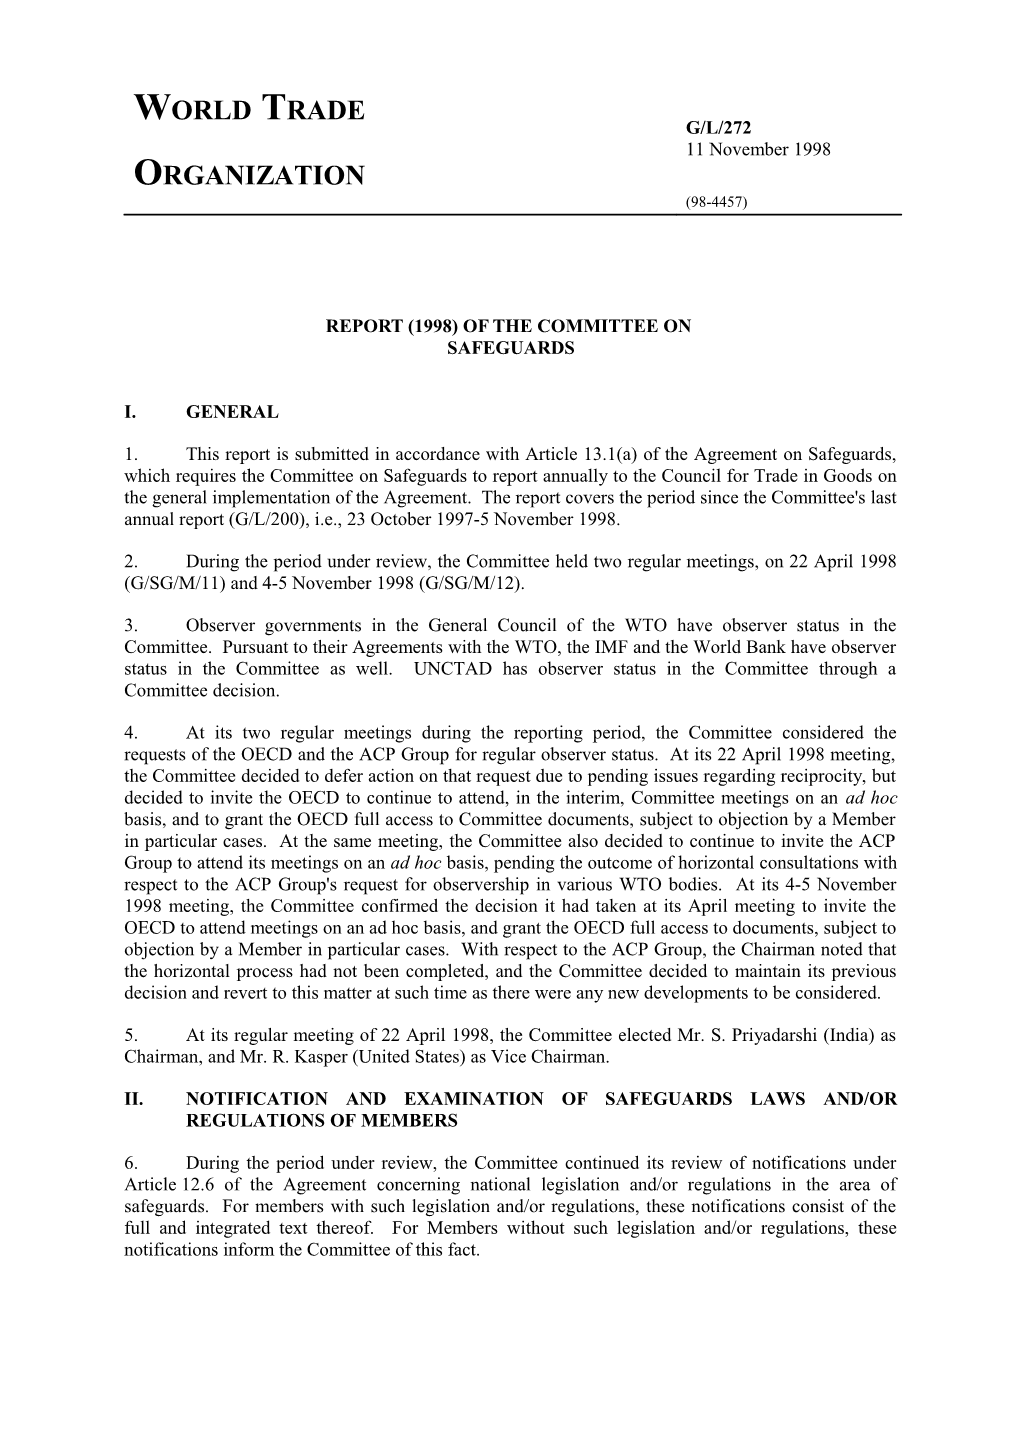 Report (1998) of the Committee On